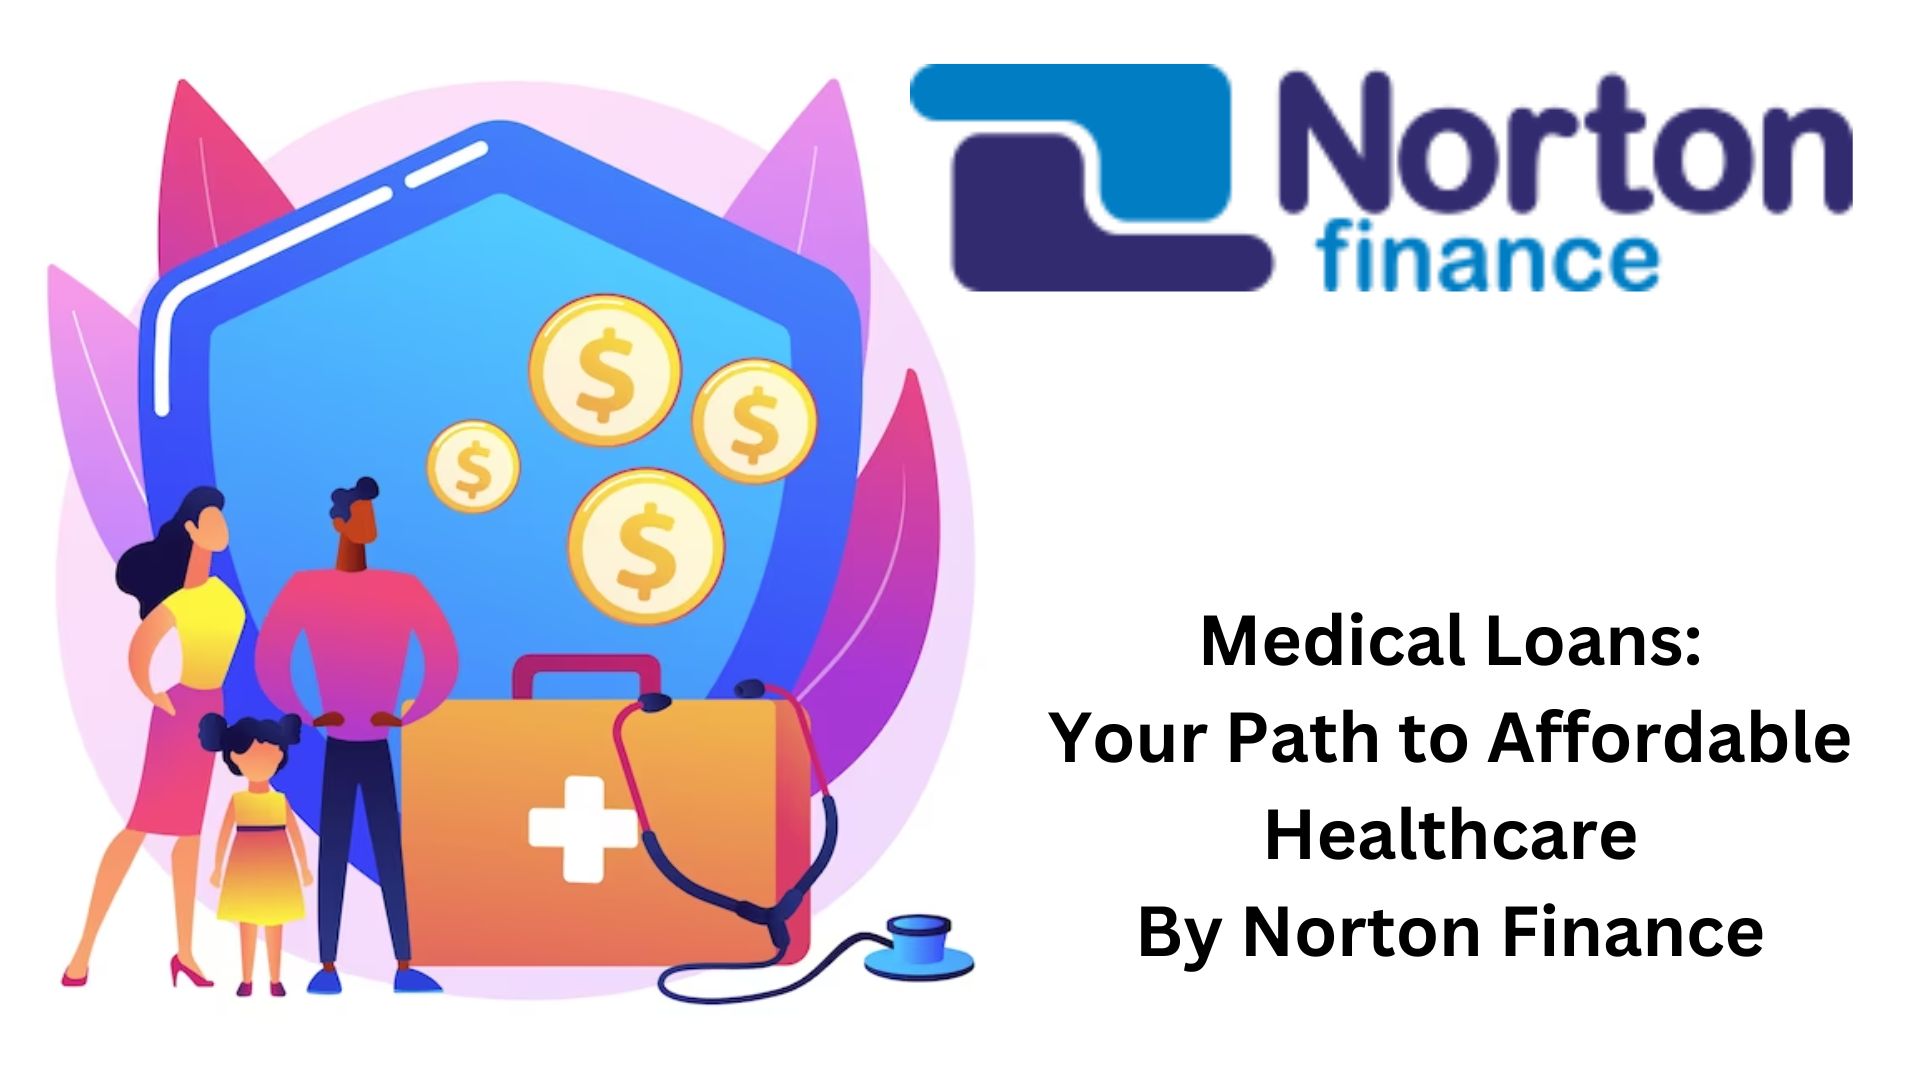 Medical Loans: Your Path to Affordable Healthcare By Norton Finance